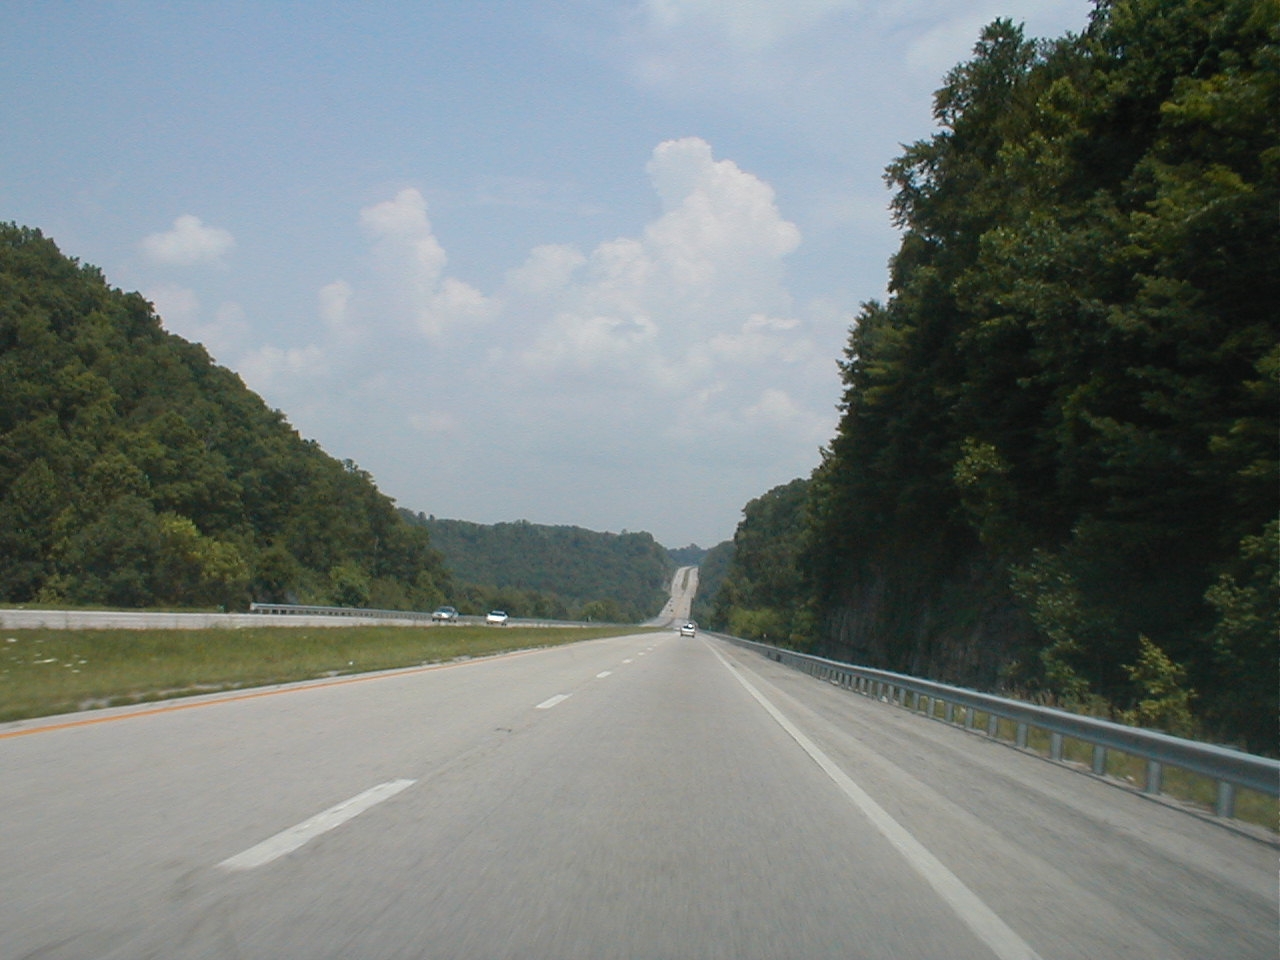 Approach to bridge crossing the Fishing Fork of the Cumberland River.